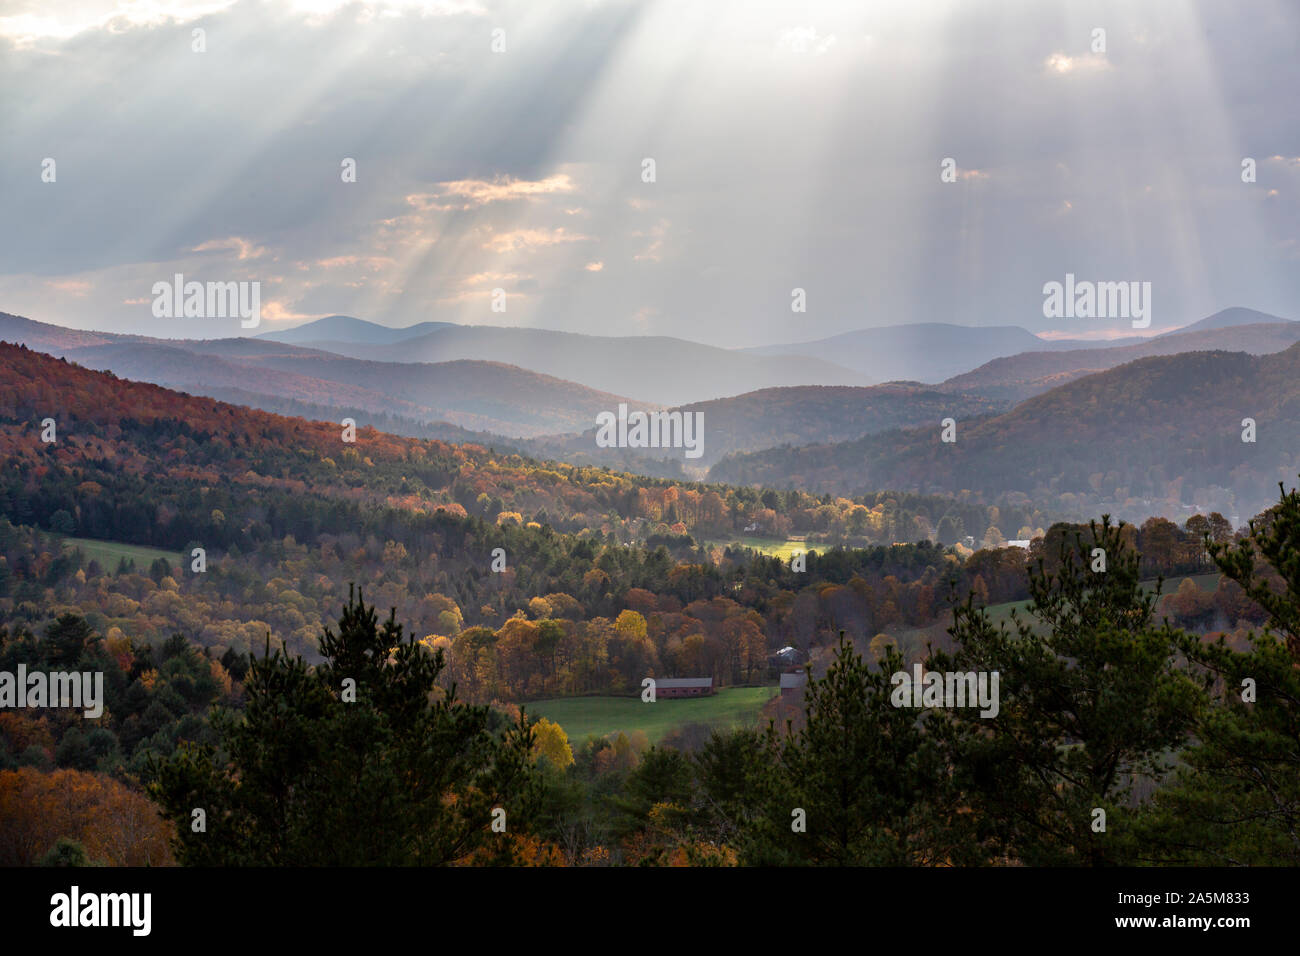 Sunlight beams through clouds above mountains in Quechee, Vermont. Stock Photo